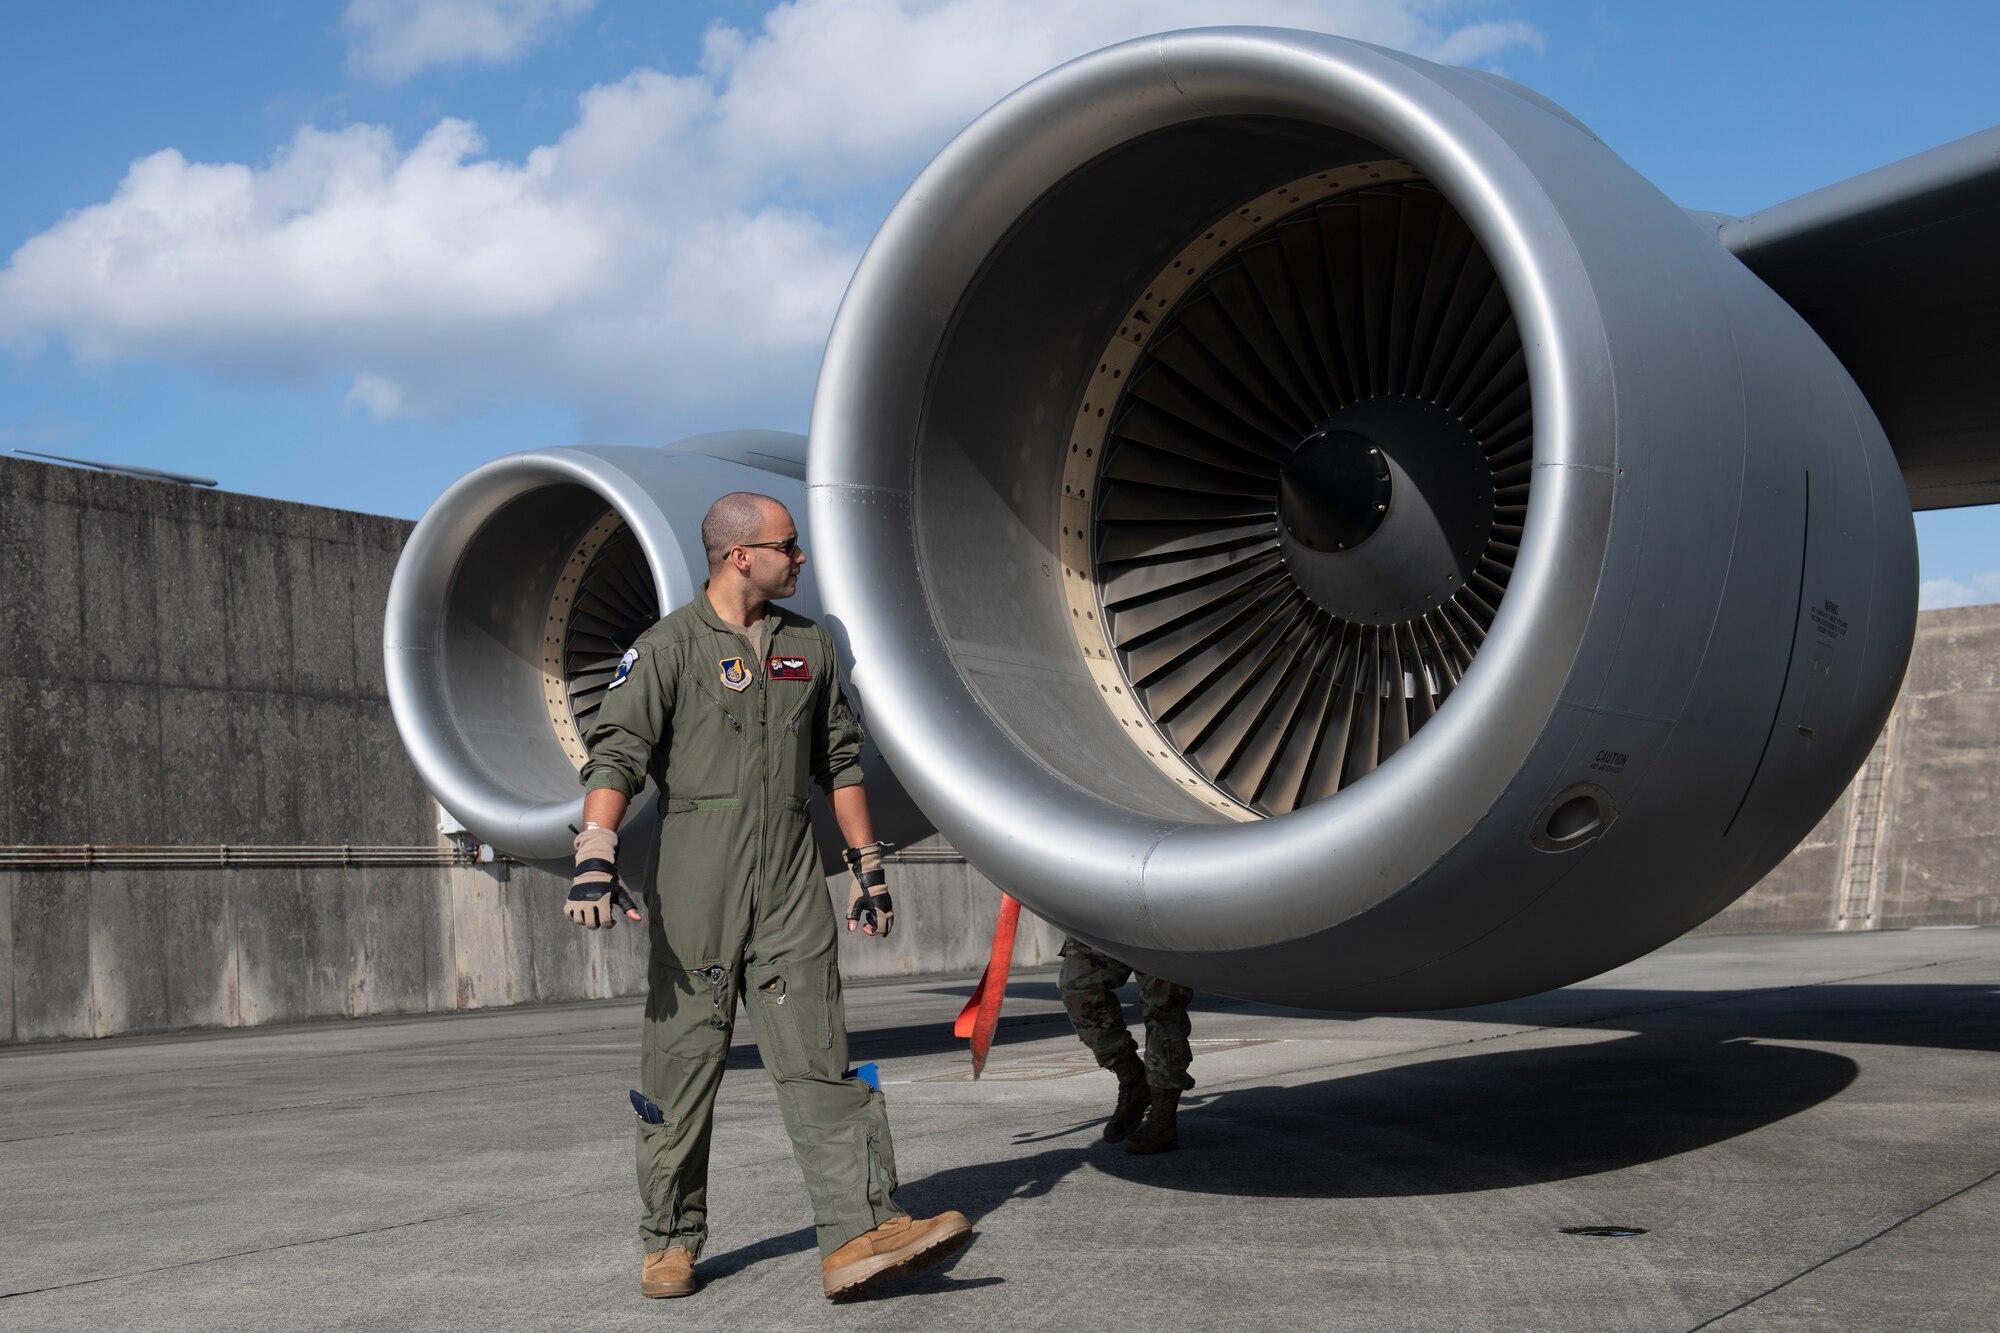 U.S. Air Force Maj. Michael Trott, 909th Air Refueling Squadron KC-135 Stratotanker pilot, conducts pre-flight checks prior to a flight in support of a joint training exercise over the Pacific Ocean, Oct. 24, 2022. Interoperability among U.S. military branches is vital to ensuring a free and open Indo-Pacific by demonstrating the ability to seamlessly integrate and accomplish the mission as one cohesive team. (U.S. Air Force photo by Senior Airman Jessi Roth)